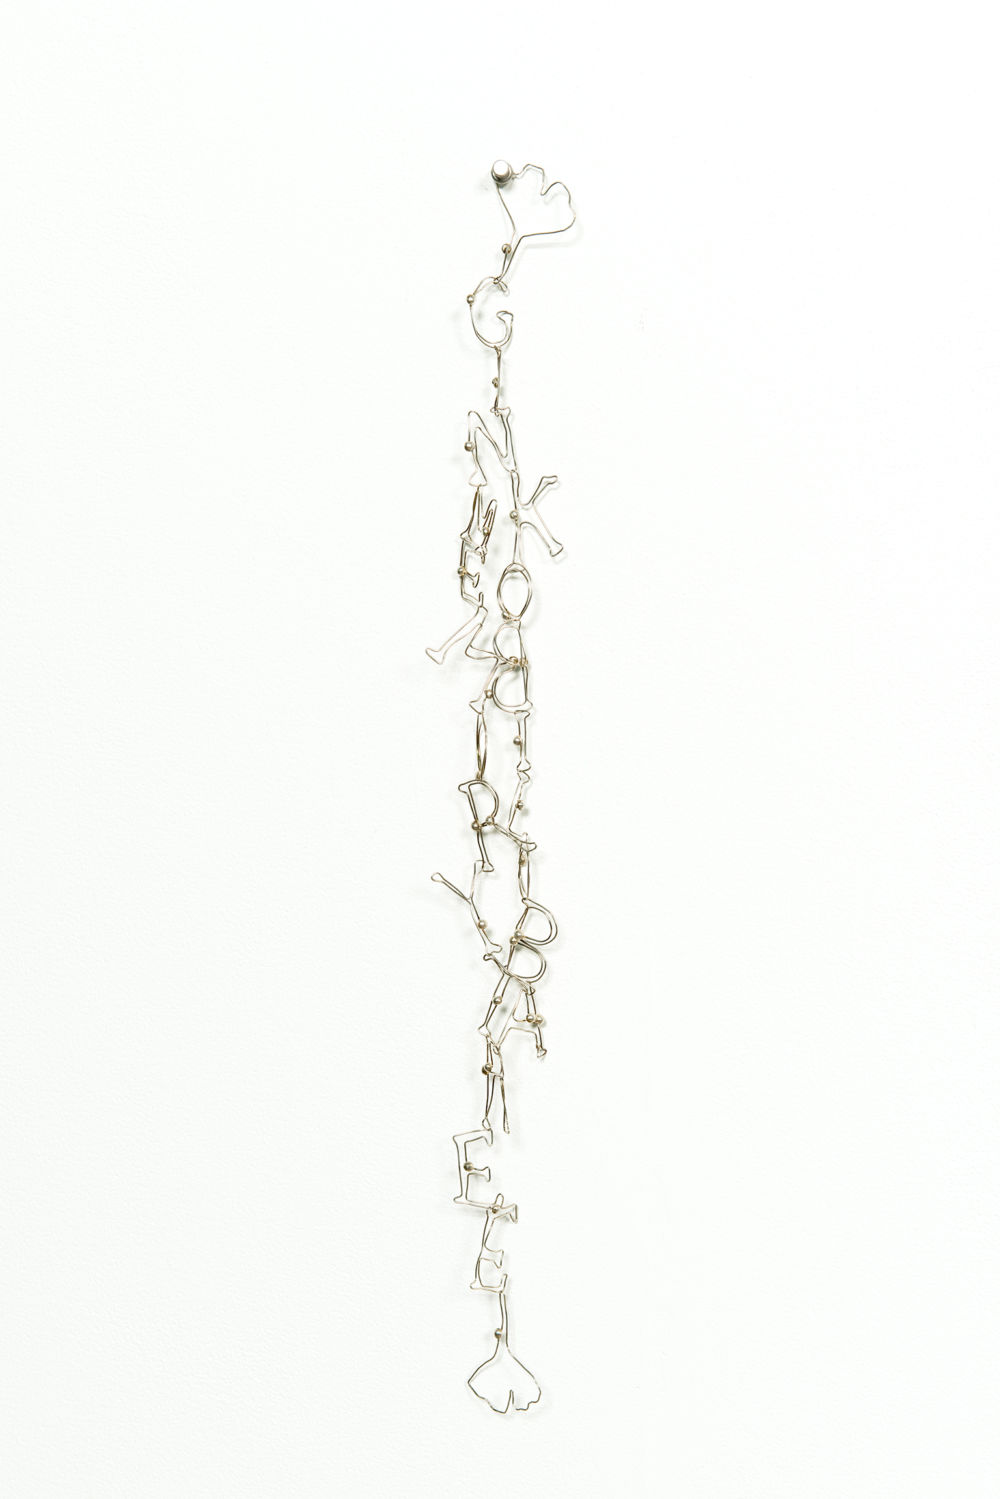 Christina Mackie, Gingko biloba memory tree (The confusion part III), 2012, silver chain, 21 x 2 x 2 in. (53 x 5 x 4 cm) by 